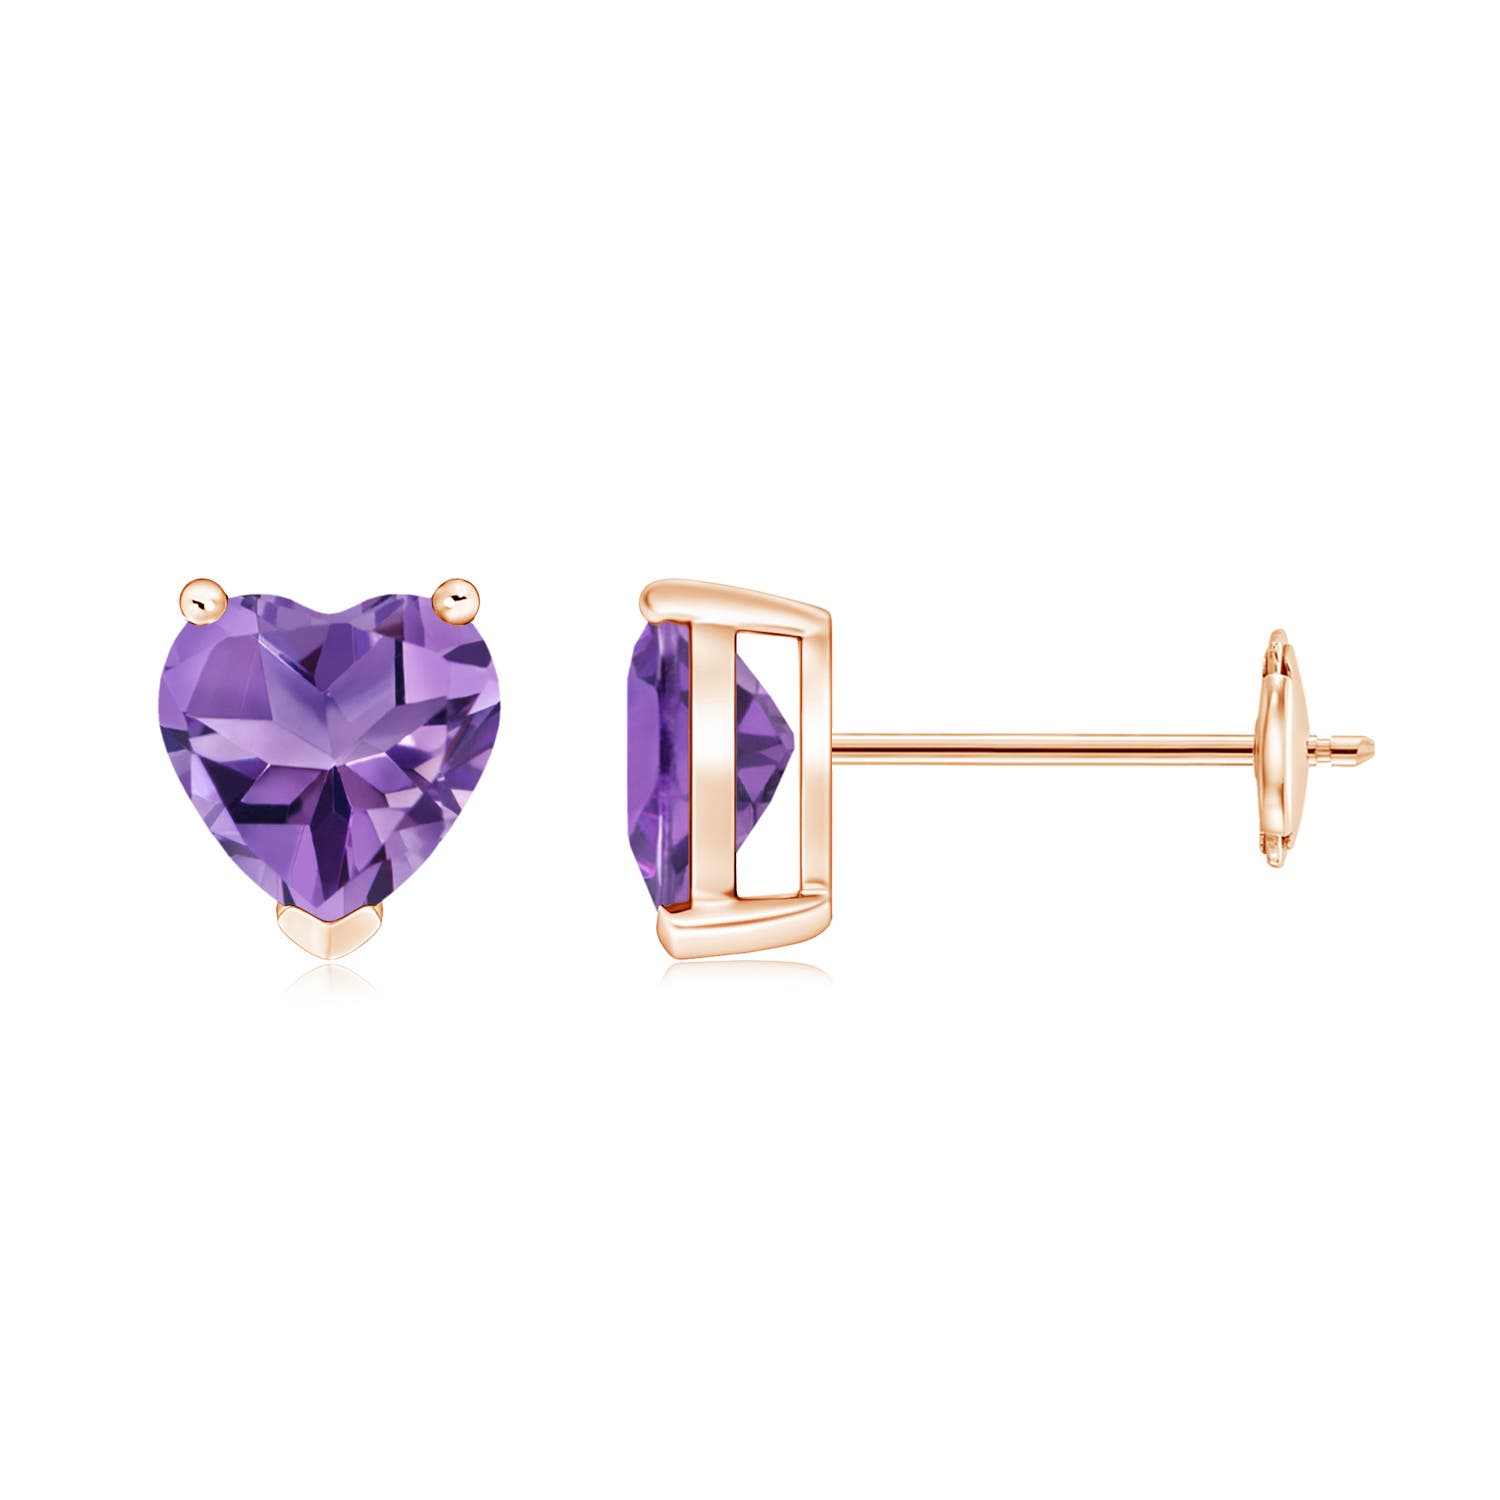 AA - Amethyst / 1.4 CT / 14 KT Rose Gold